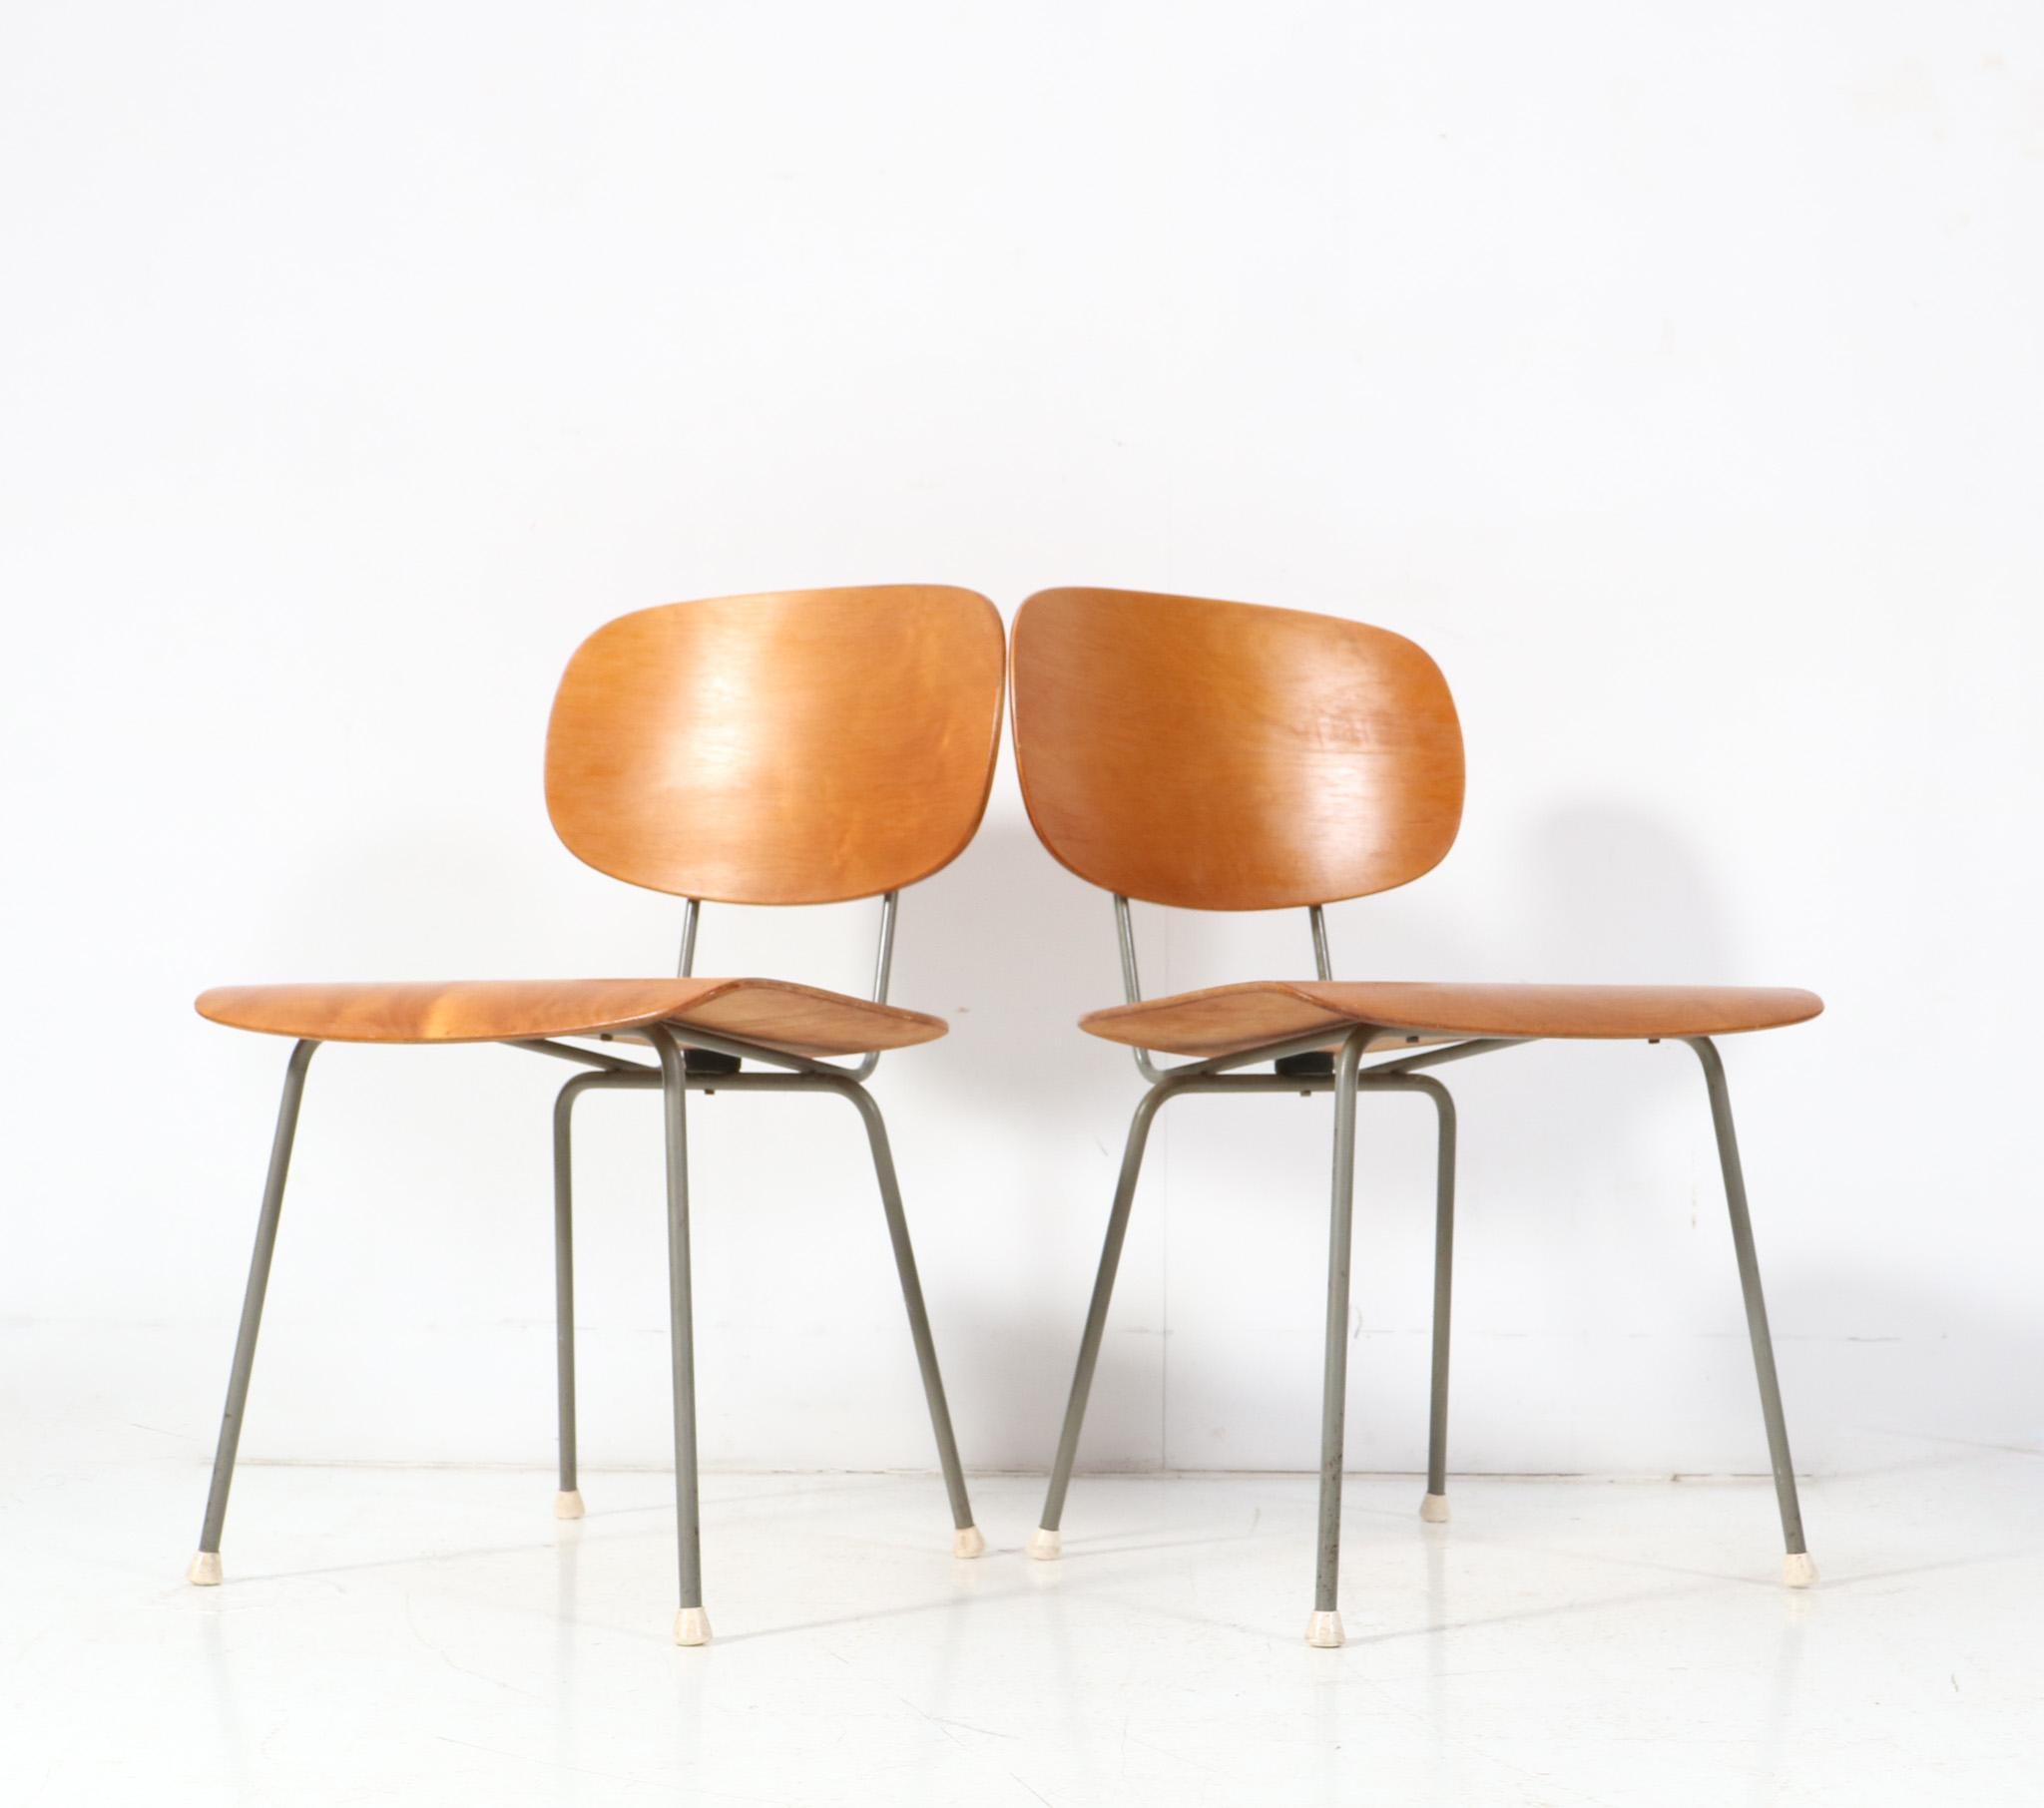 Metal Pair of Mid-Century Modern Model 116 Side Chairs by Wim Rietveld for Gispen For Sale